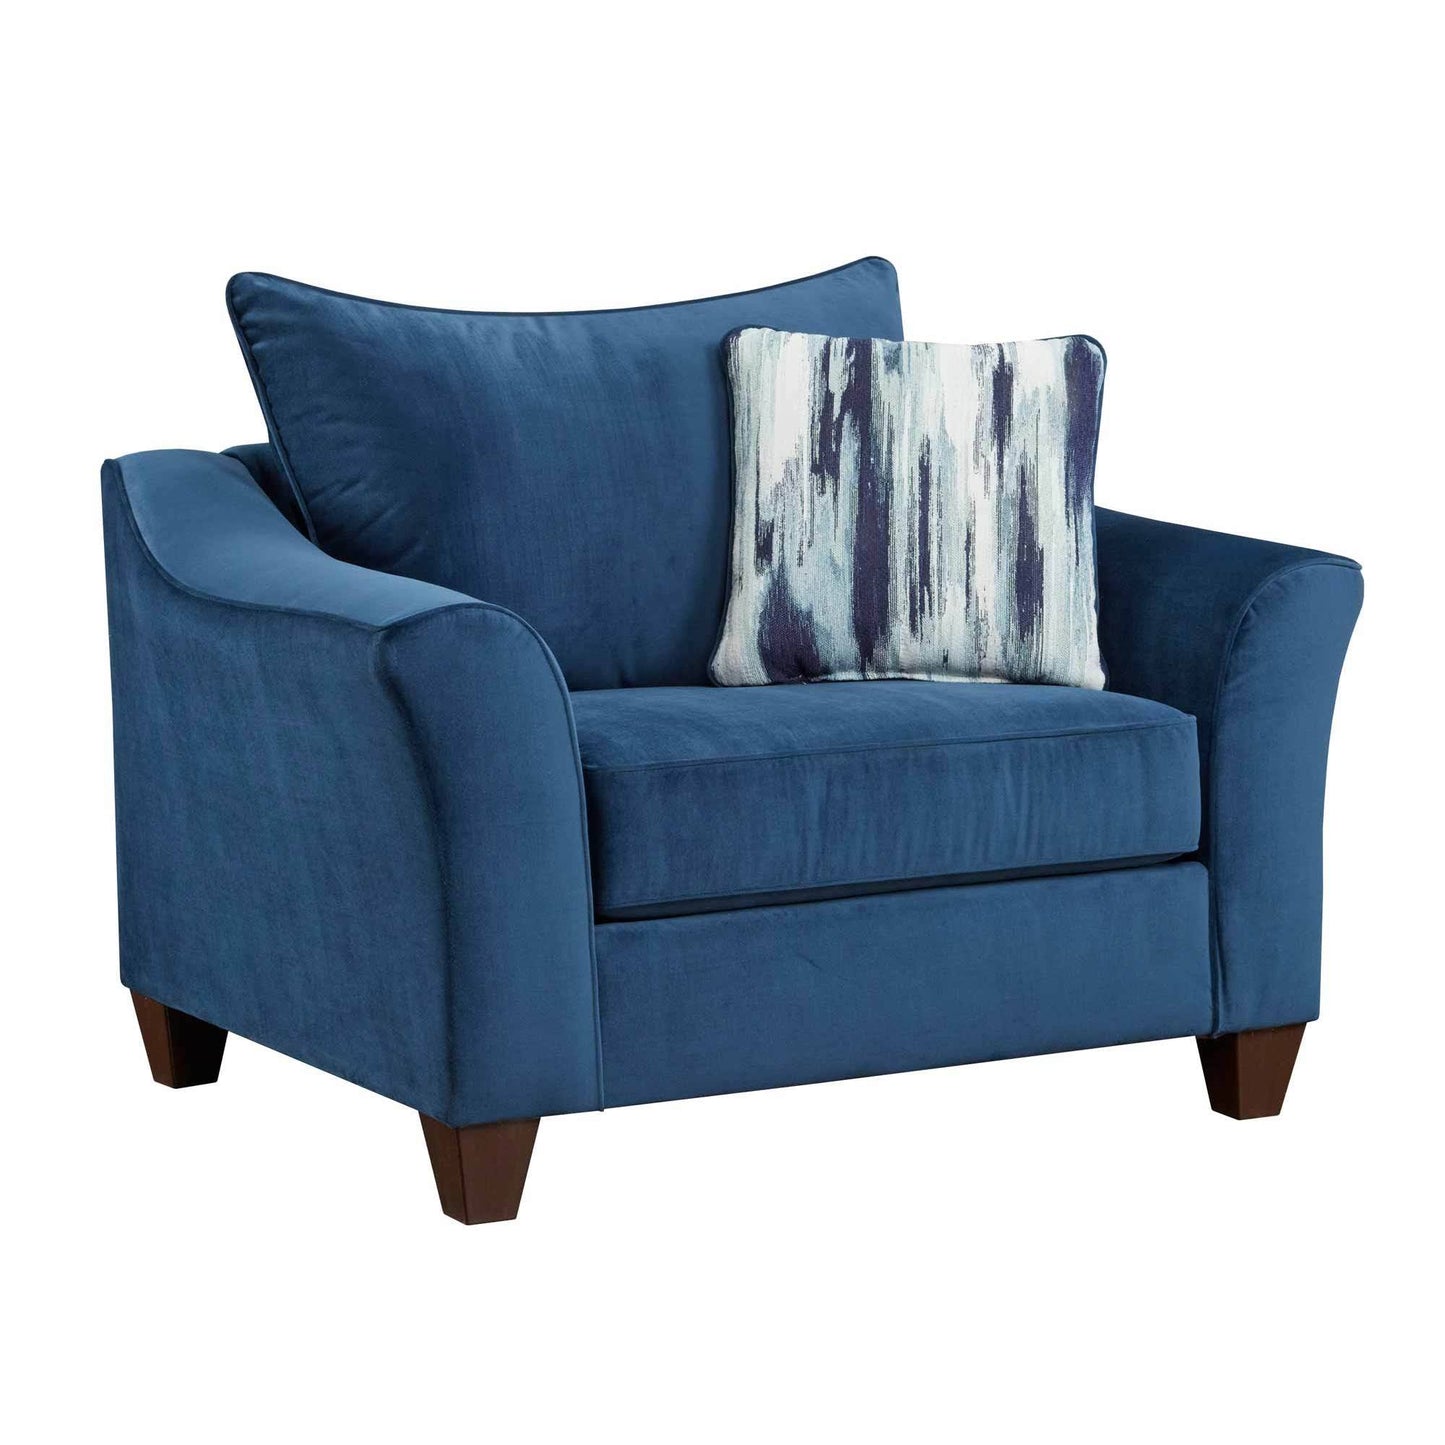 Navy Accent Chair - Blue - Polyester - Living Room Furniture > Accent Chairs - New - 65998415